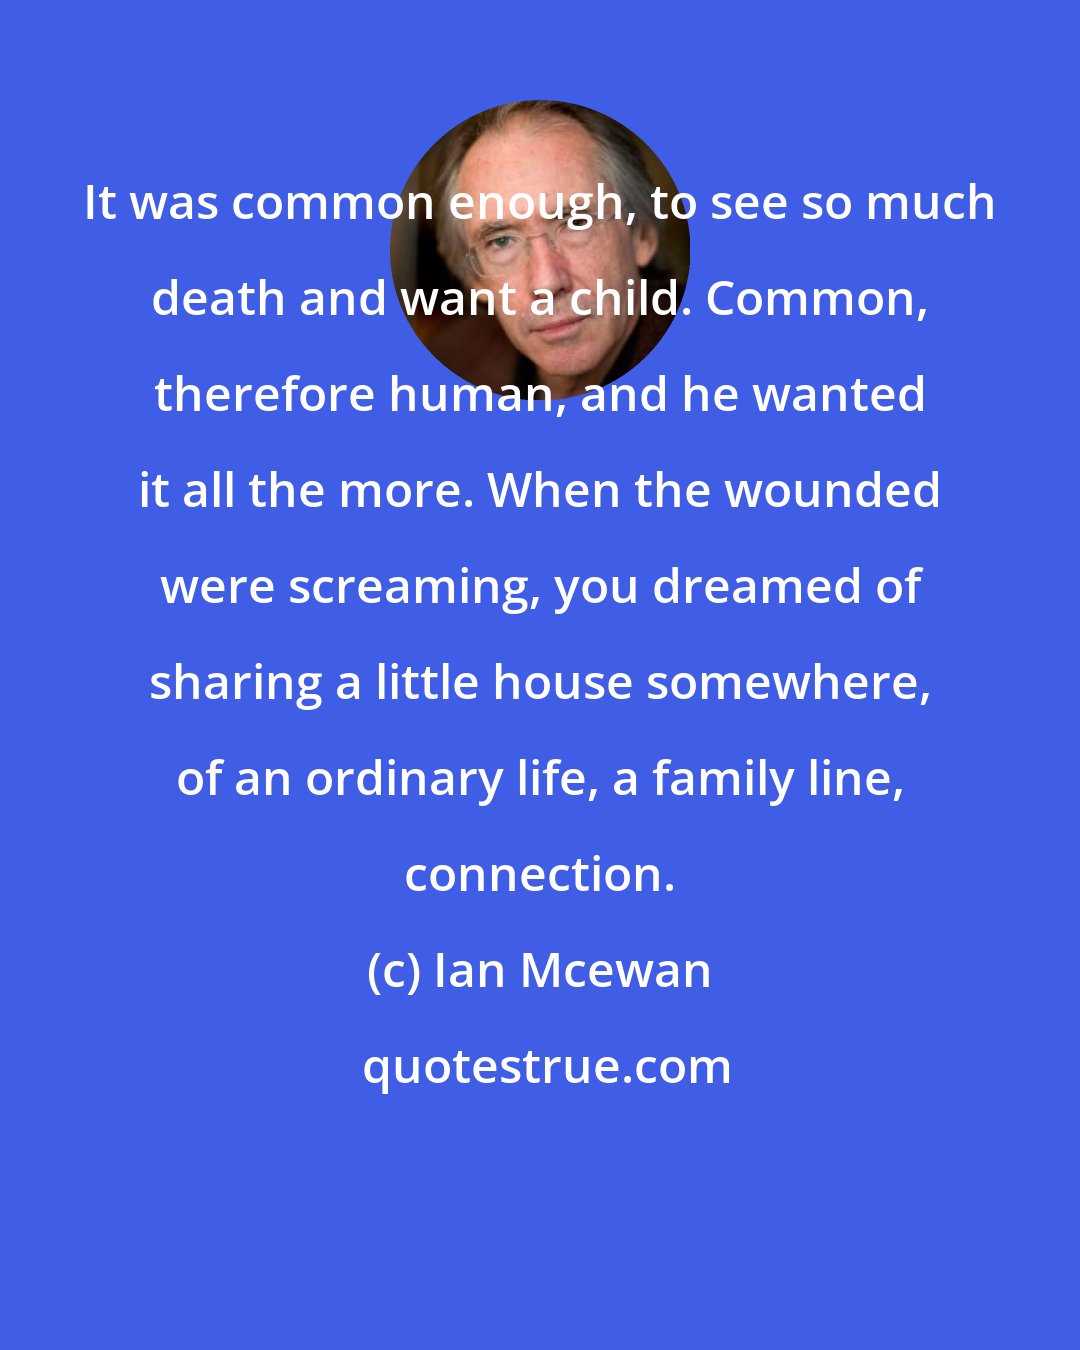 Ian Mcewan: It was common enough, to see so much death and want a child. Common, therefore human, and he wanted it all the more. When the wounded were screaming, you dreamed of sharing a little house somewhere, of an ordinary life, a family line, connection.